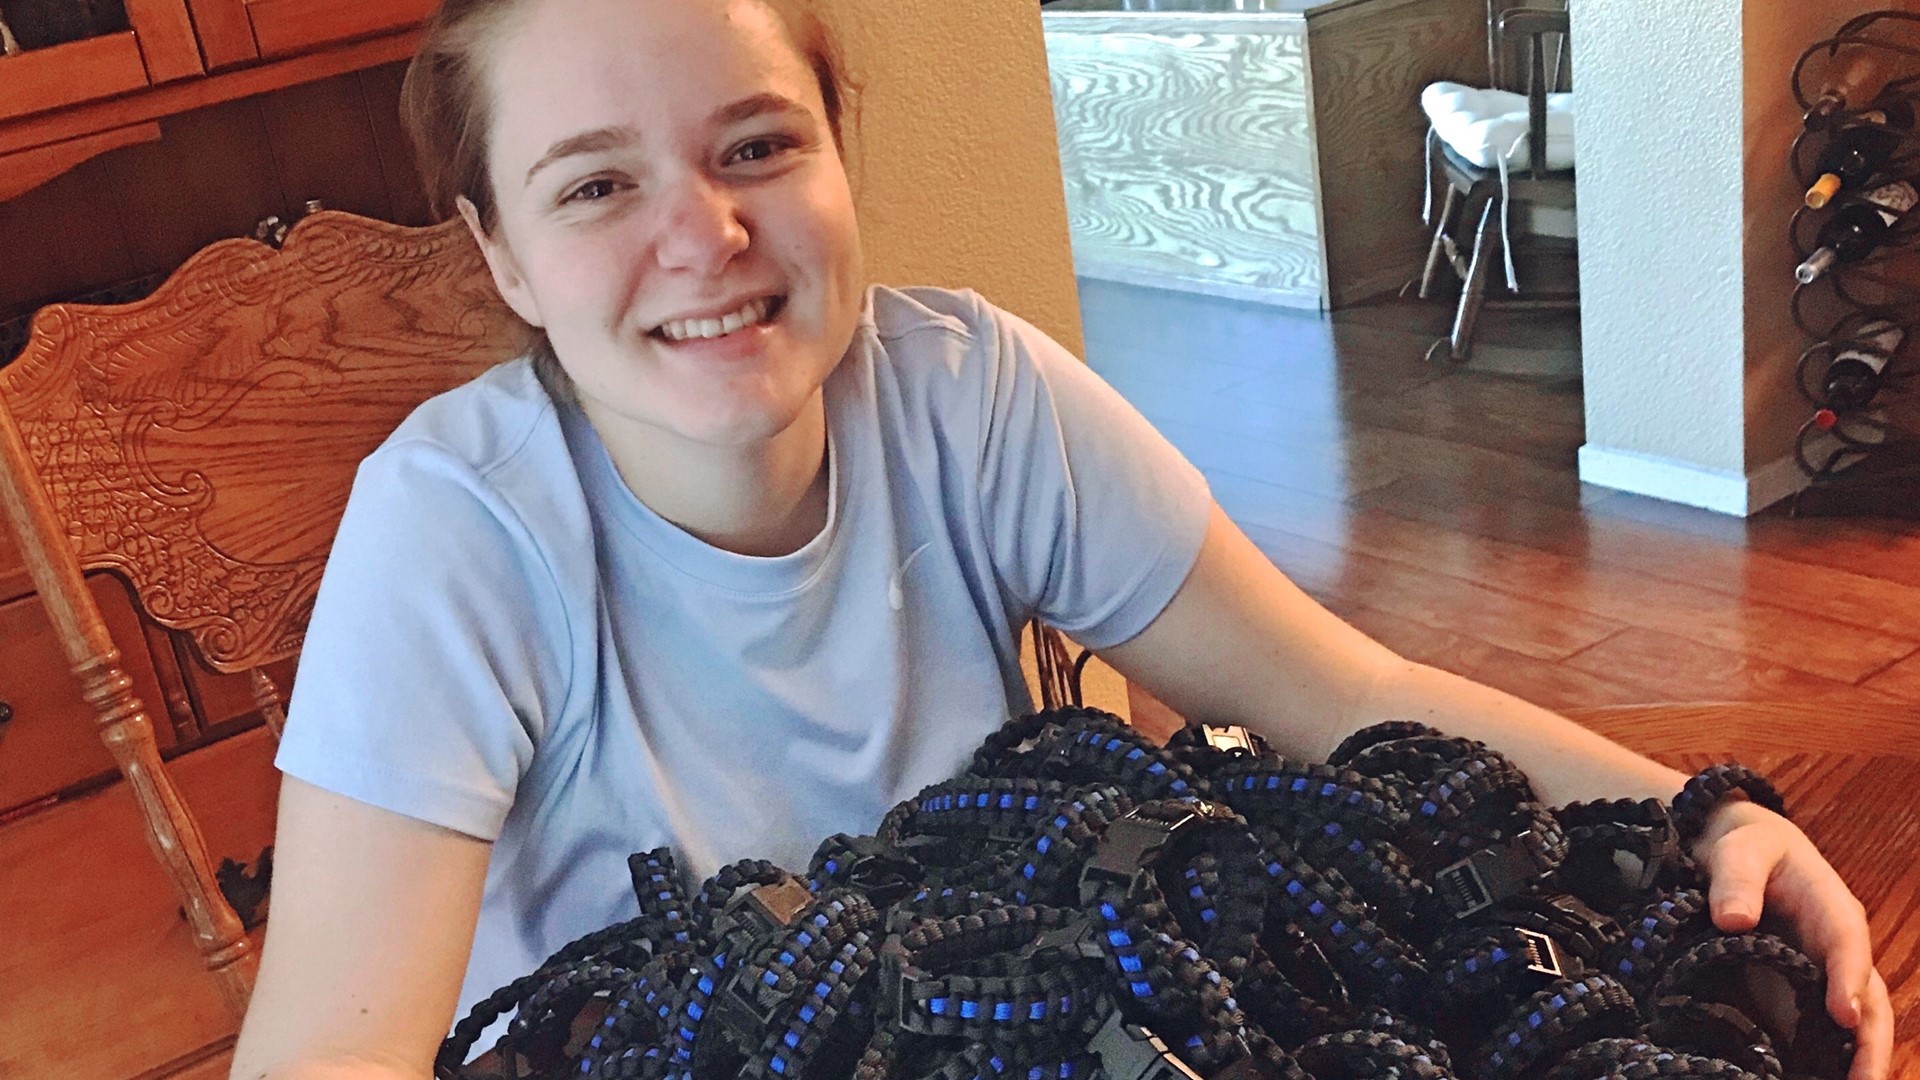 Kaitlyn Riley carries blue line bracelets everywhere she goes. She hopes others will follow her example and help show law enforcement that they are appreciated.